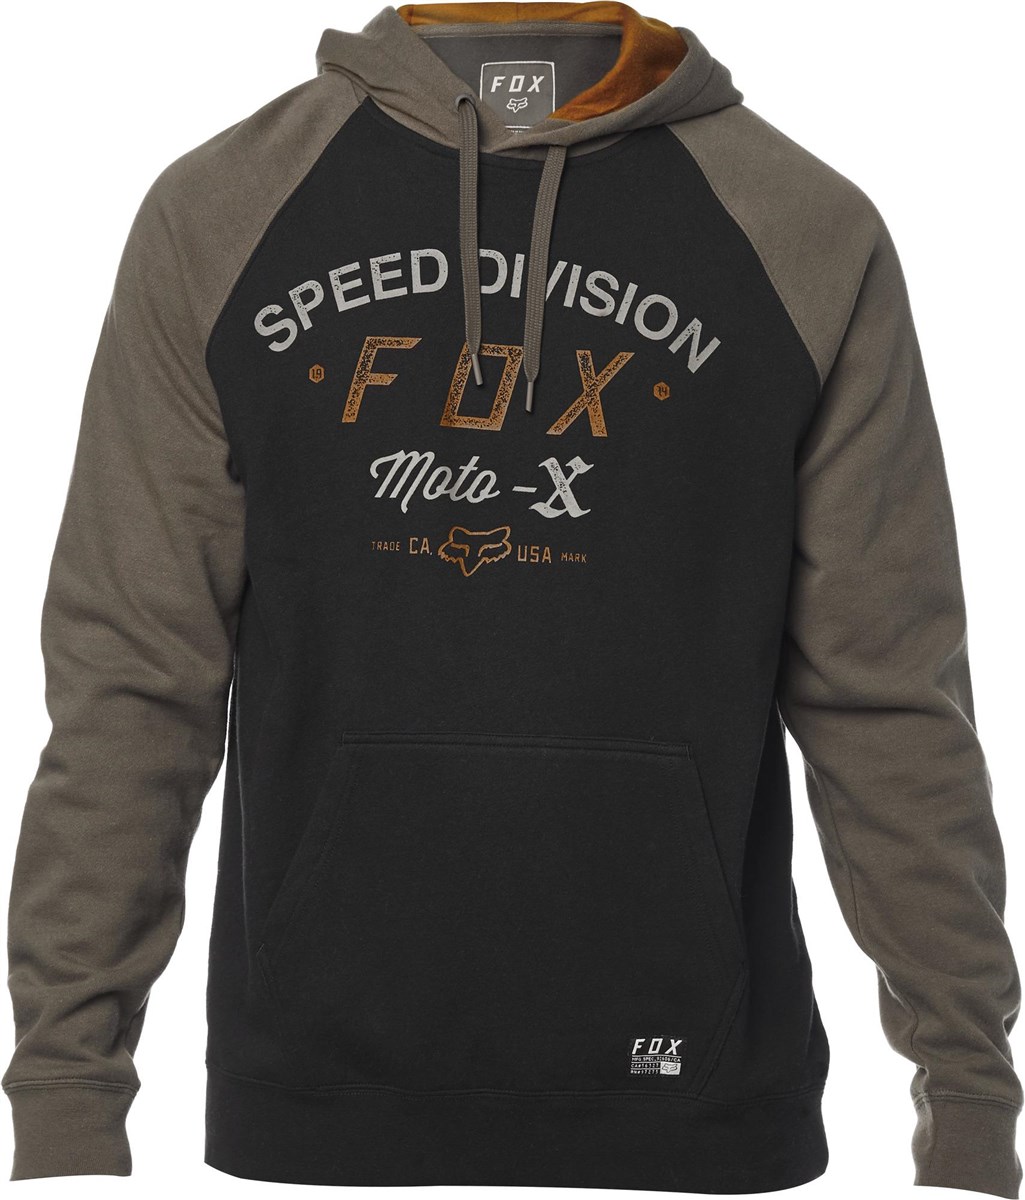 Fox Clothing Archery Pullover Fleece / Hoodie product image